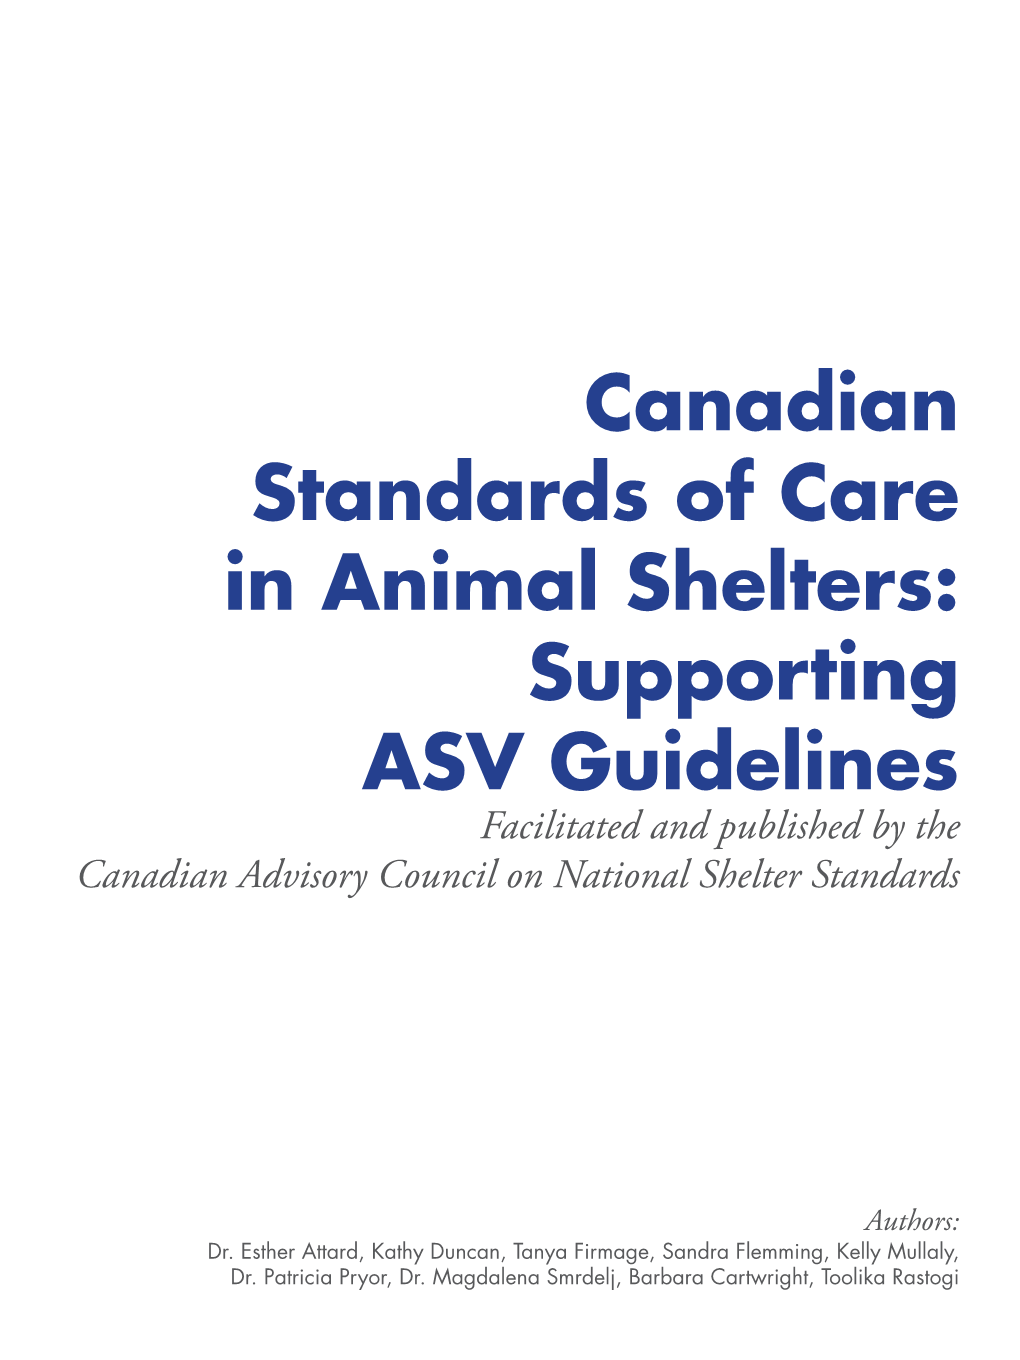 Canadian Standards of Care in Animal Shelters: Supporting ASV Guidelines Facilitated and Published by the Canadian Advisory Council on National Shelter Standards